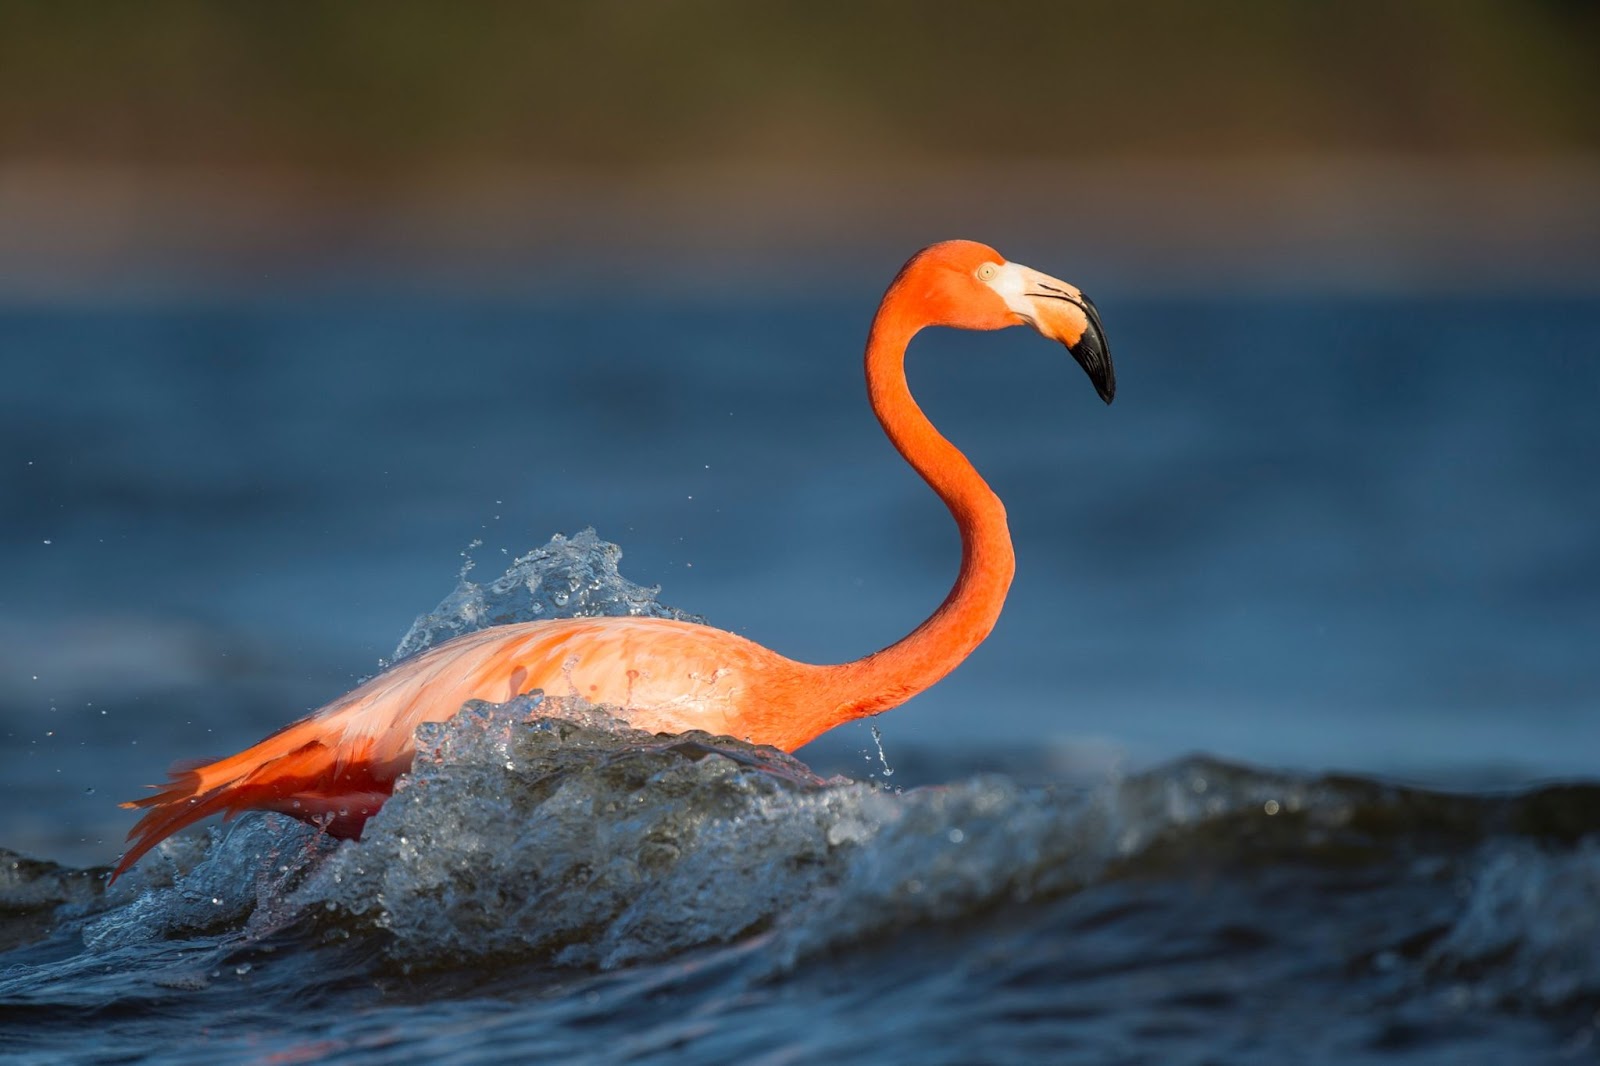 A flamingo wading in shallow waters